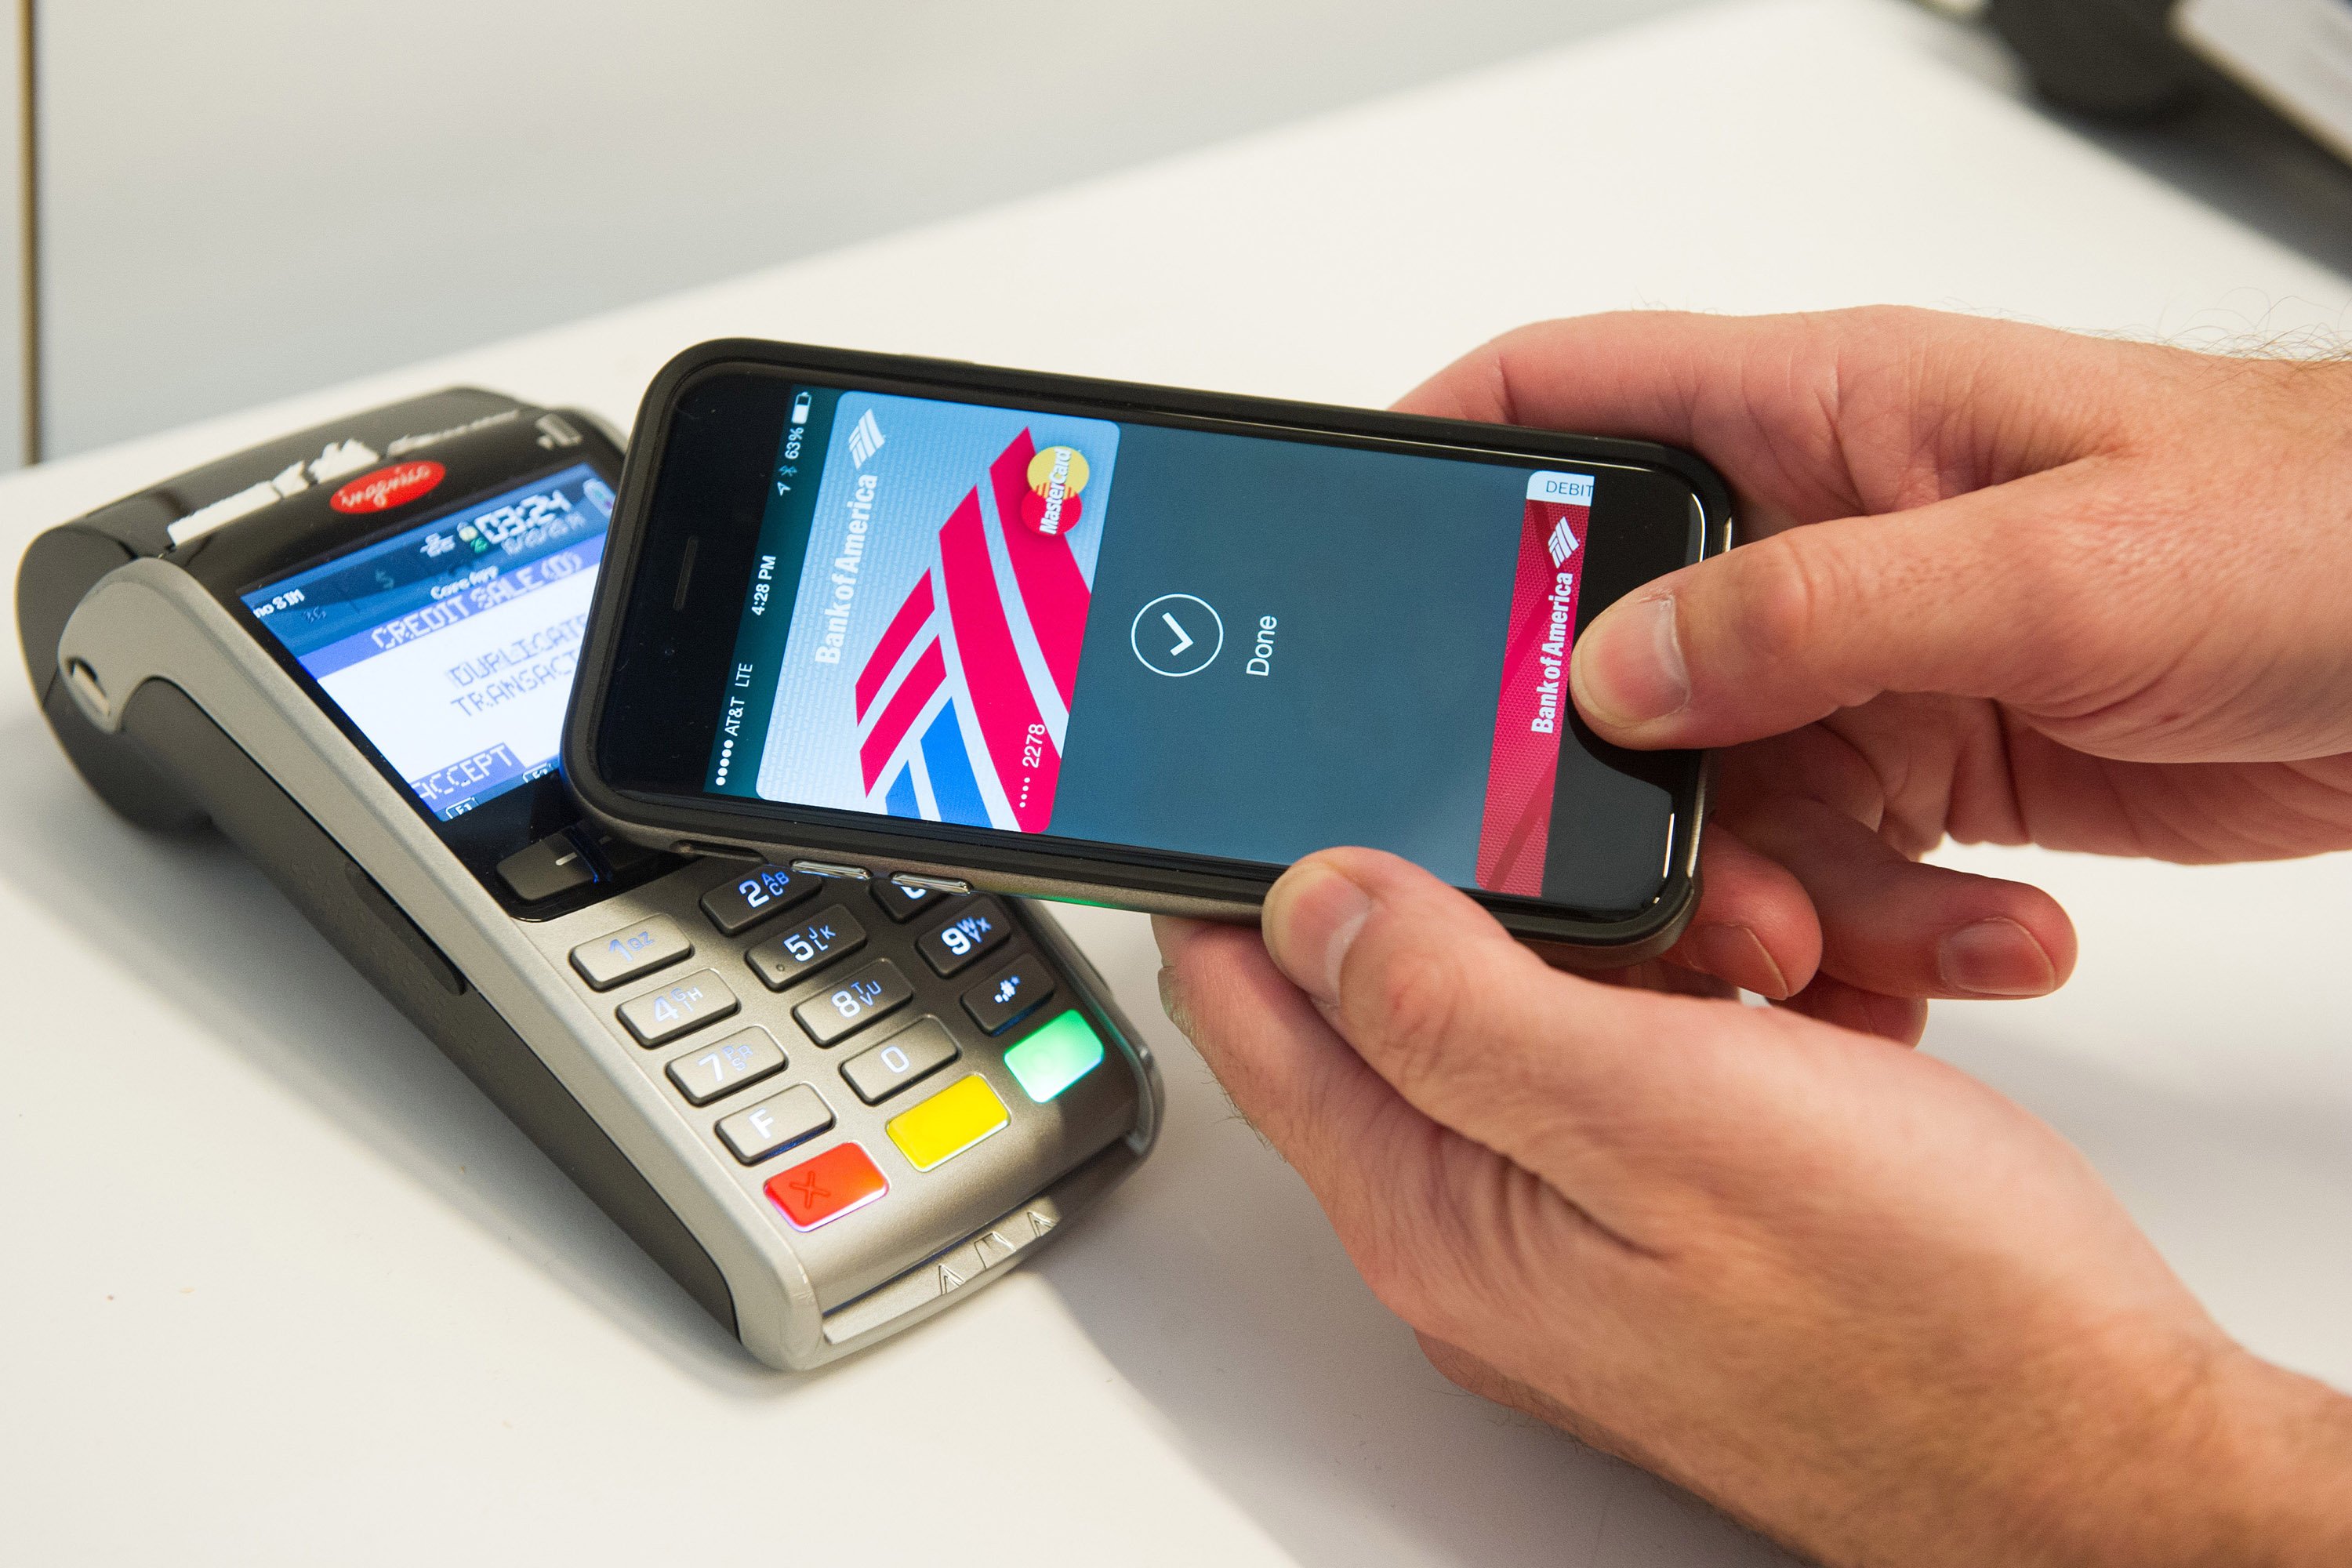 MasterCard demonstrates Apple Pay at the launch of MasterCard's NYC Tech Hub on Monday, Oct. 20, 2014 in New York. (Charles Sykes—Invision)